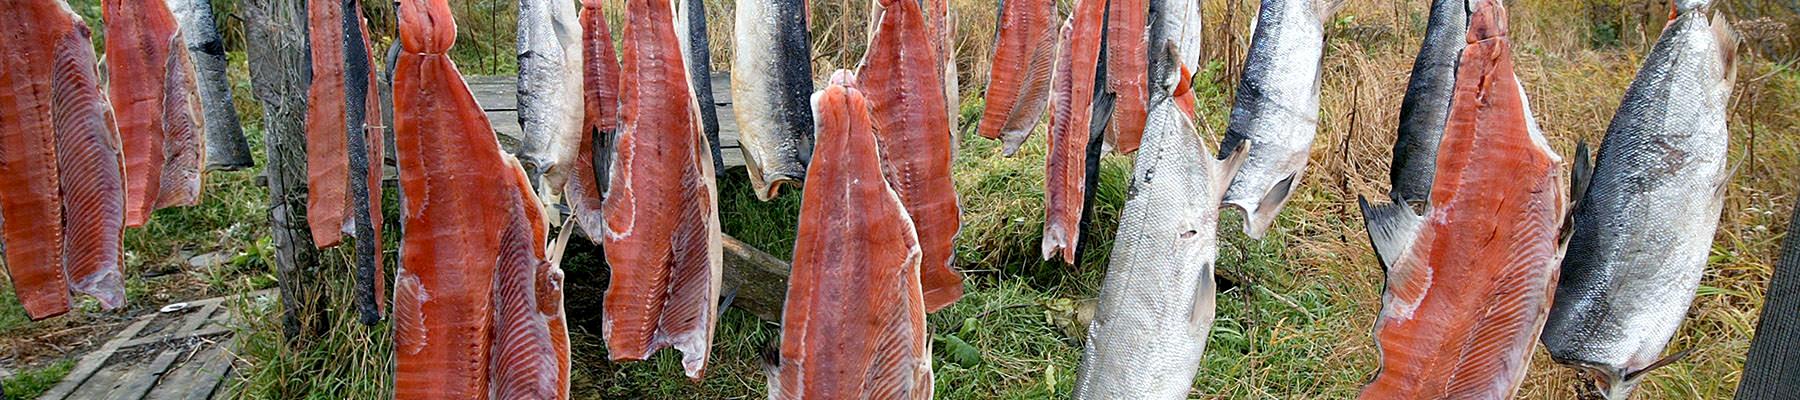 Salmons hanged for drying in the Russian Federation © Vladimir Filonov / WWF